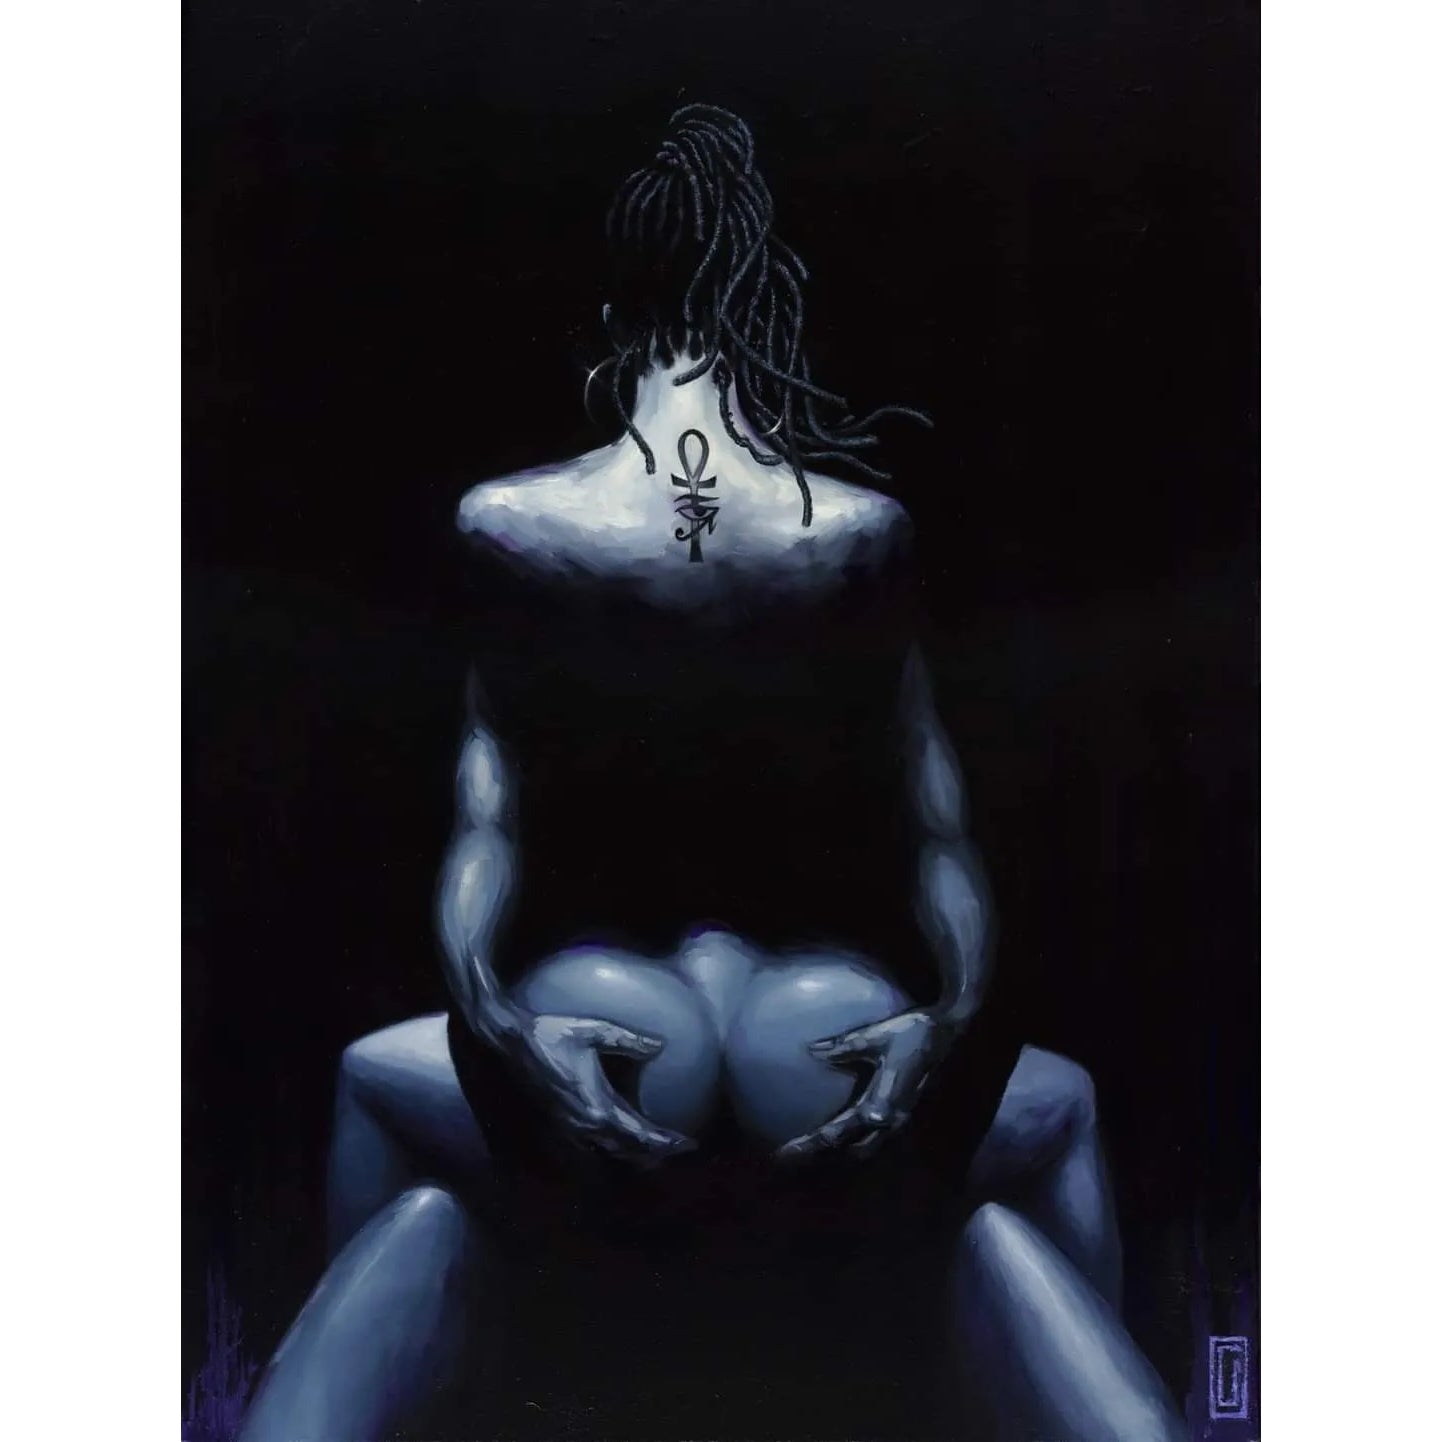 Black Erotic Art Prints, Figurines and Gifts